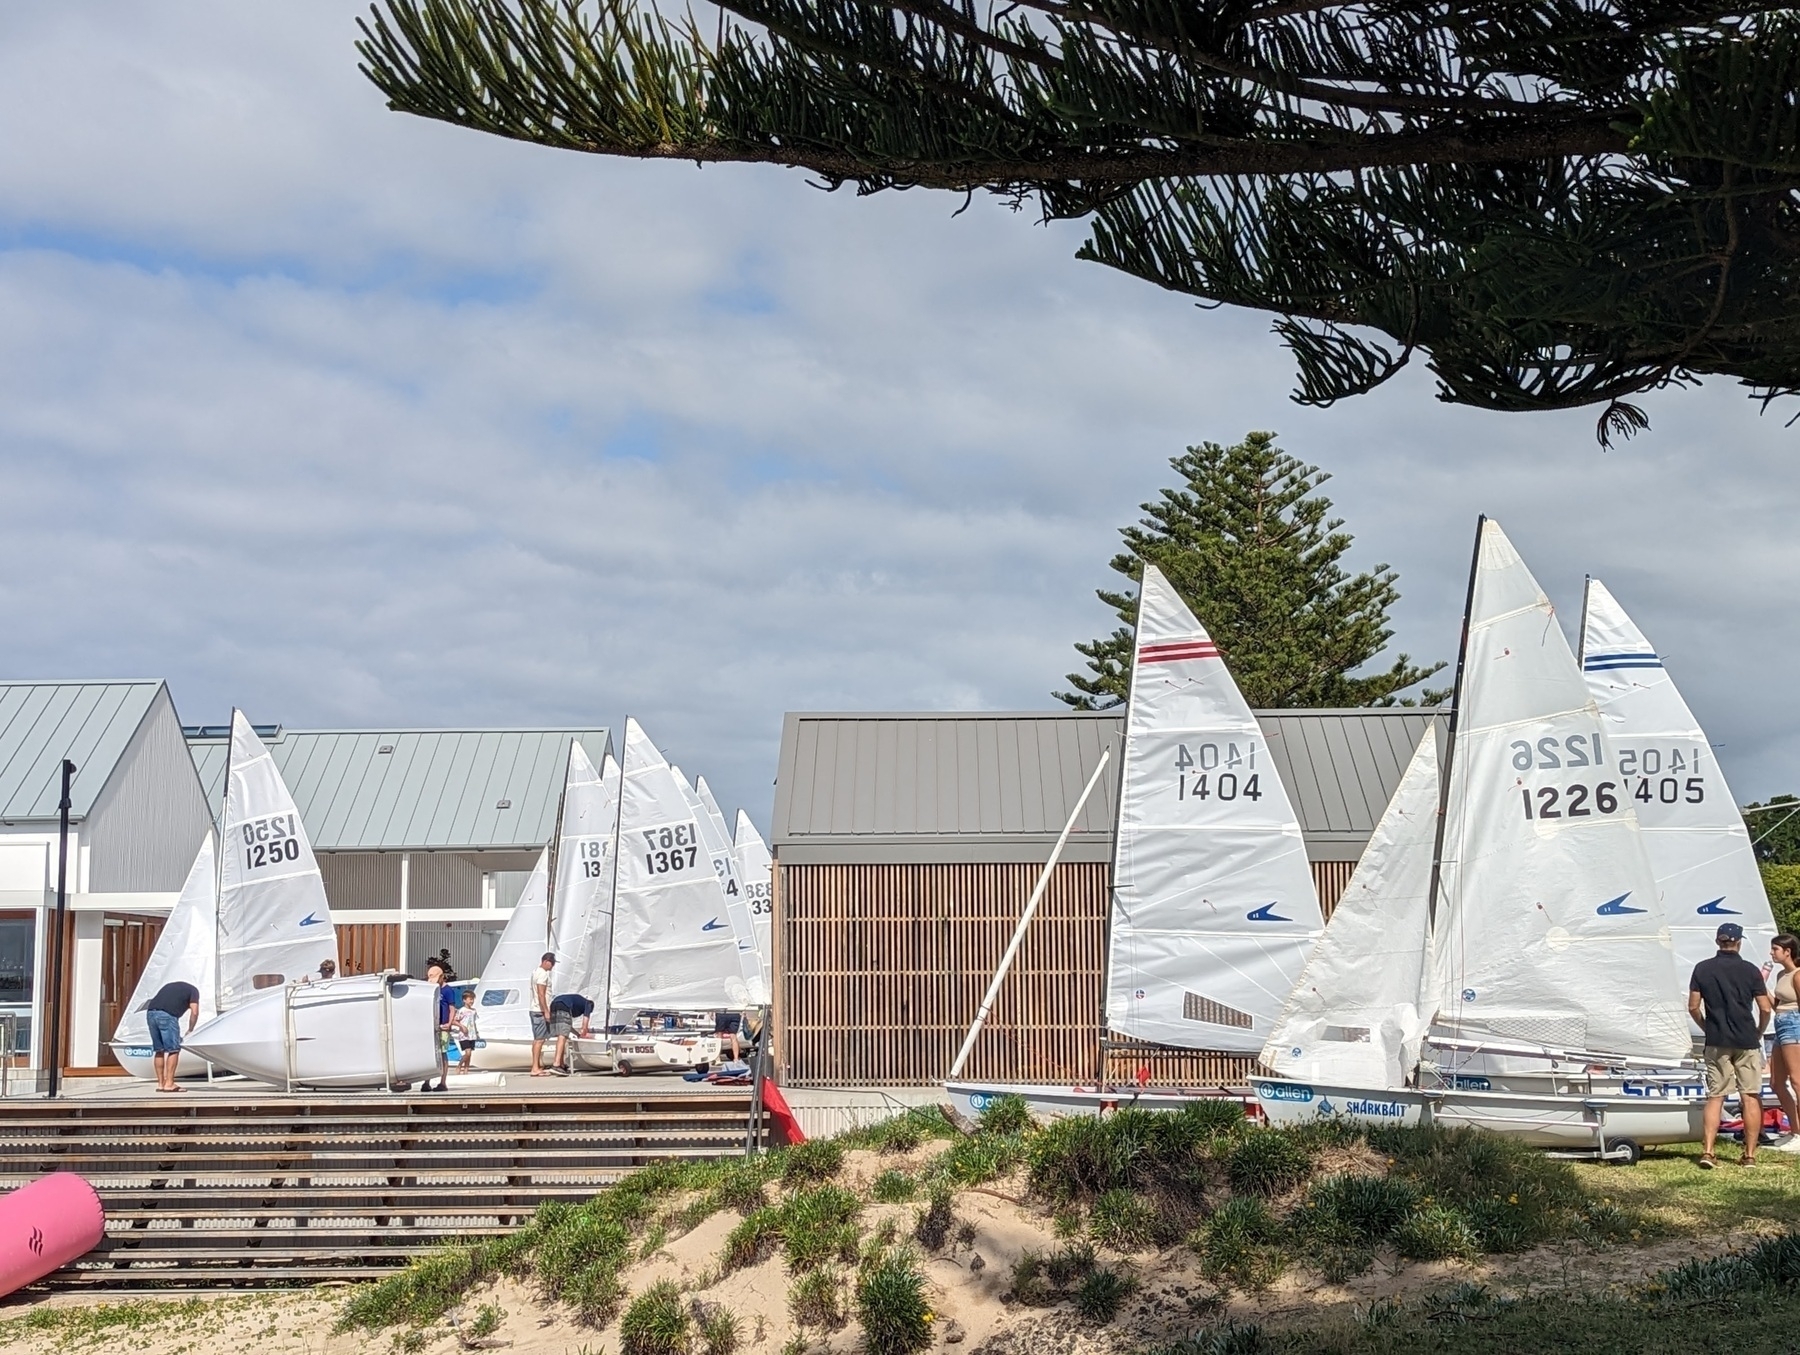 A flotilla of Flying Eleven sailing dinghies, white sails raised, cluster around a sailing club